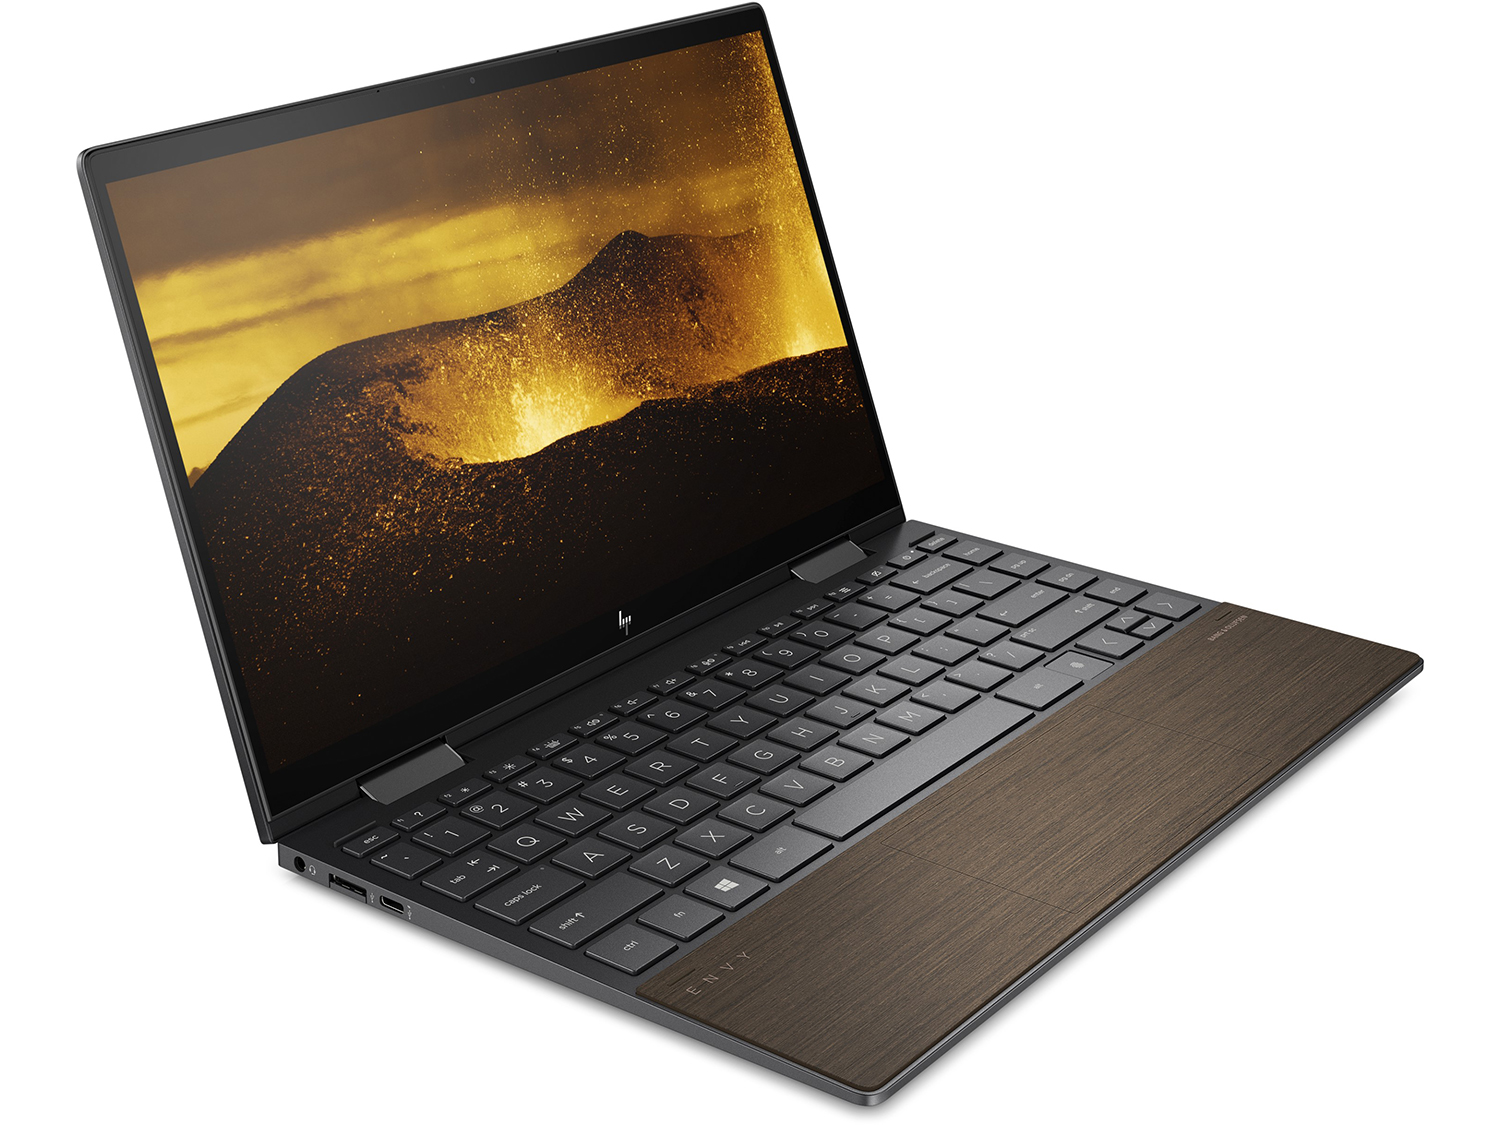 HP Envy x   ay review   a great little machine for